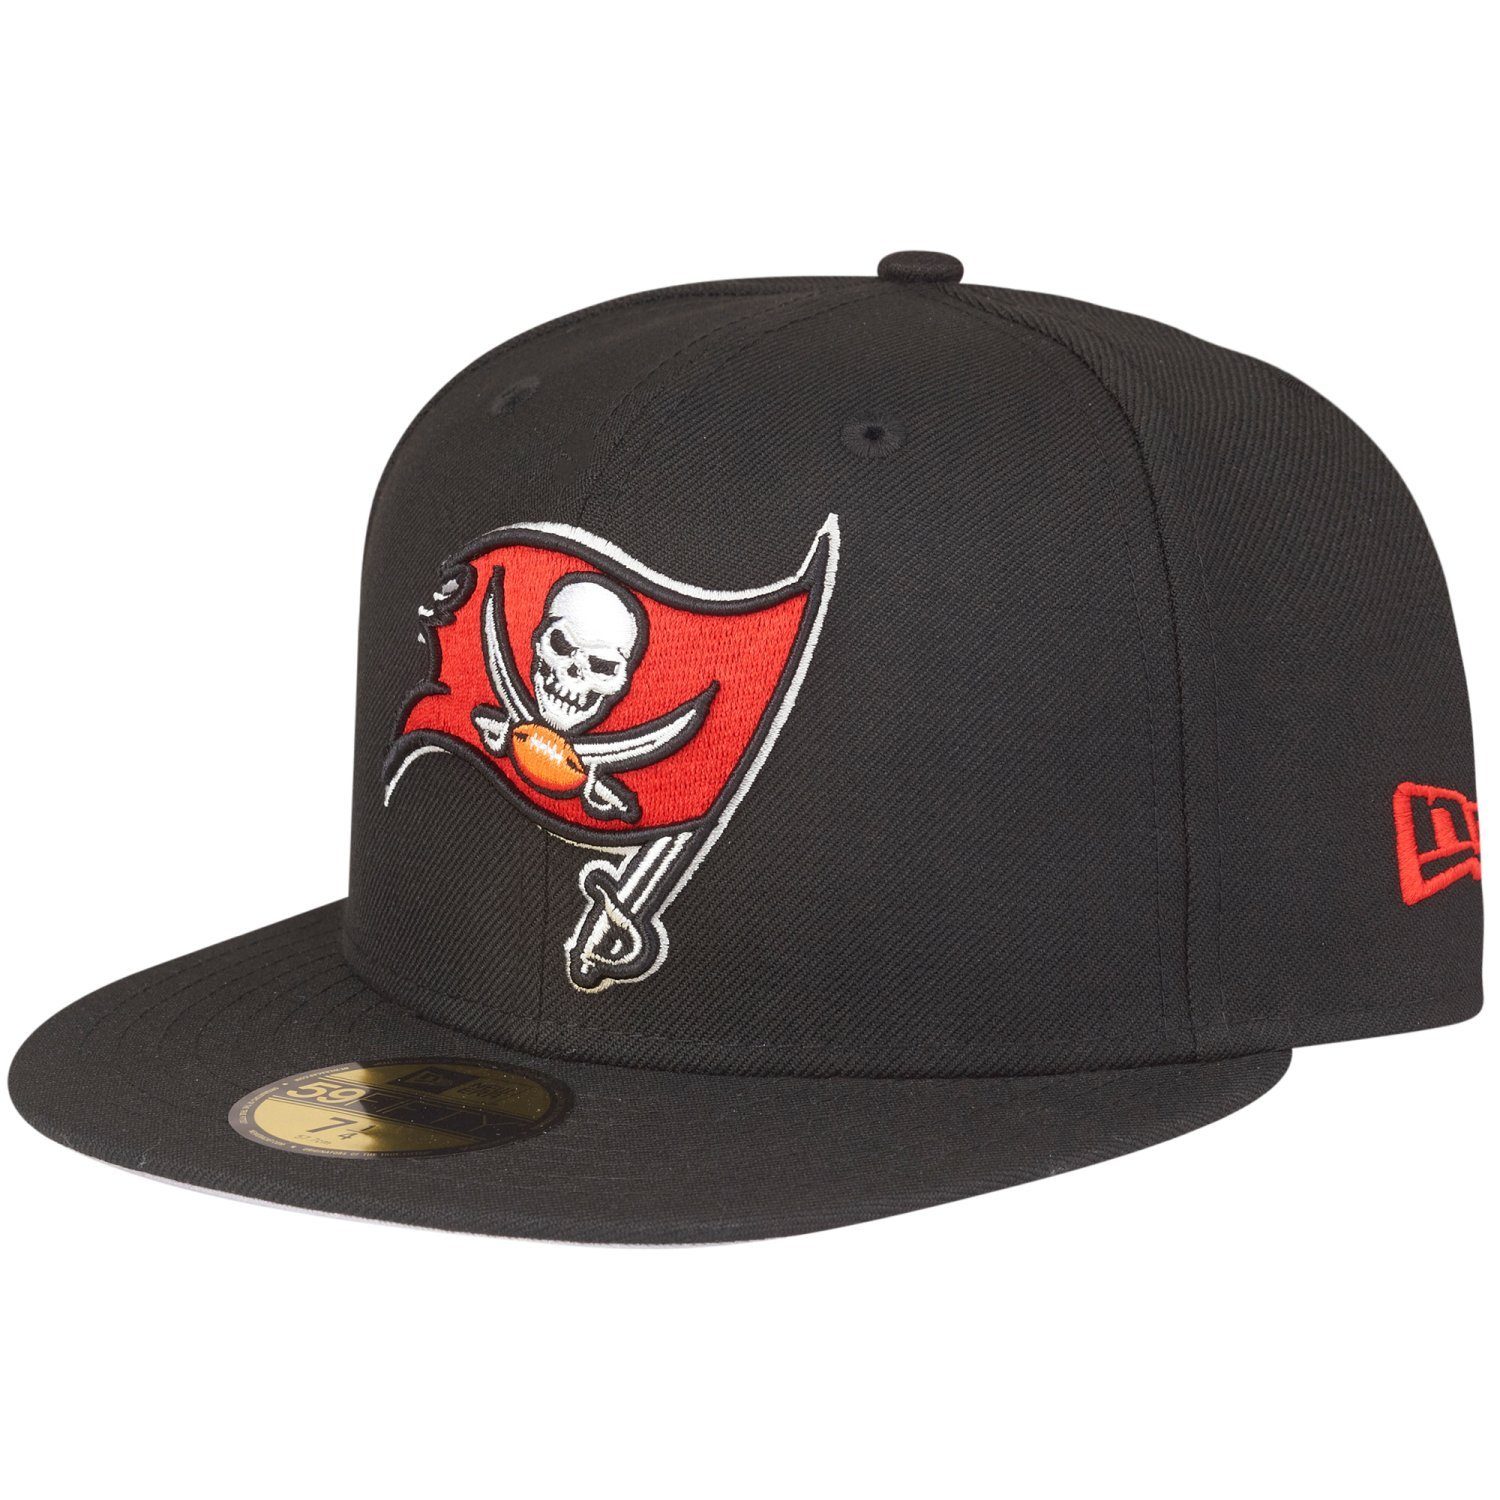 Bay Tampa Era 59Fifty Buccaneers New Fitted Cap NFL